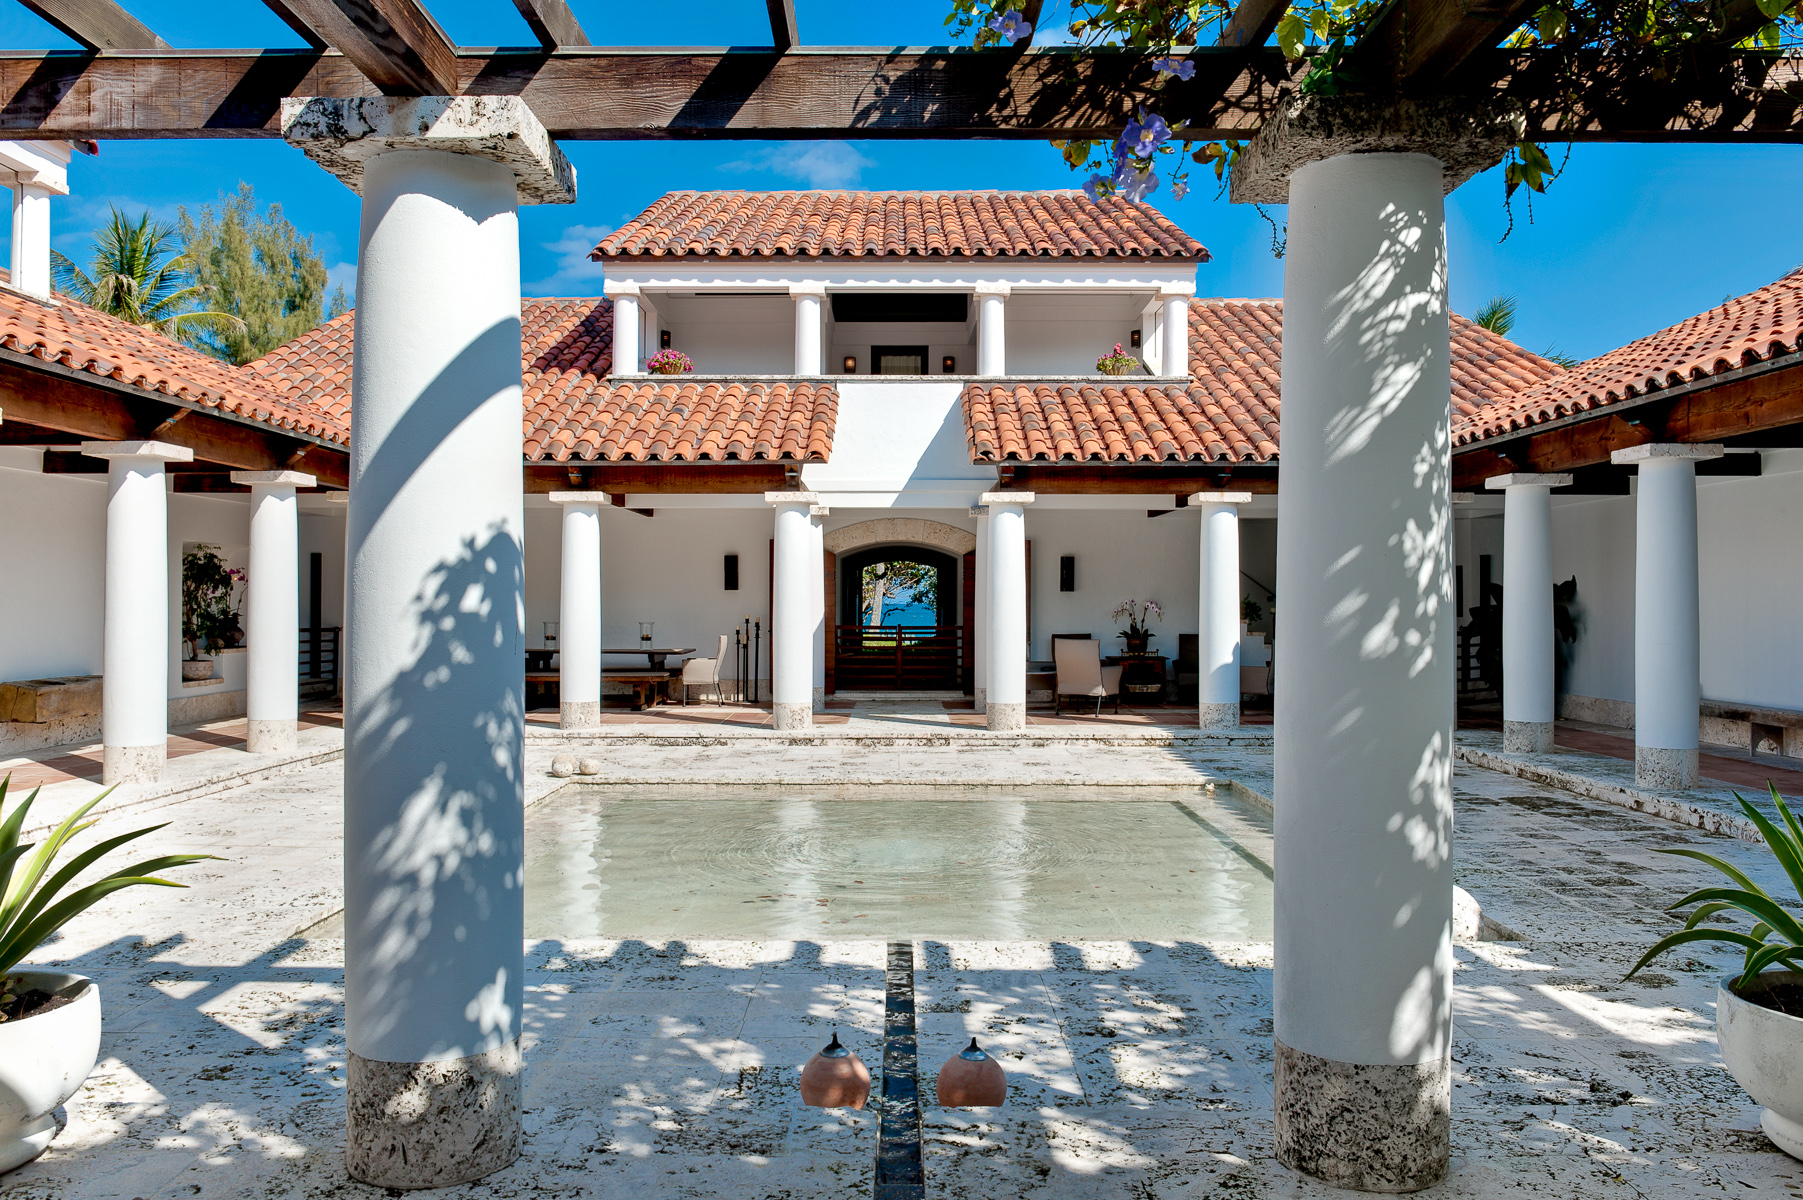 the courtyard of a house with a pool and pillars.